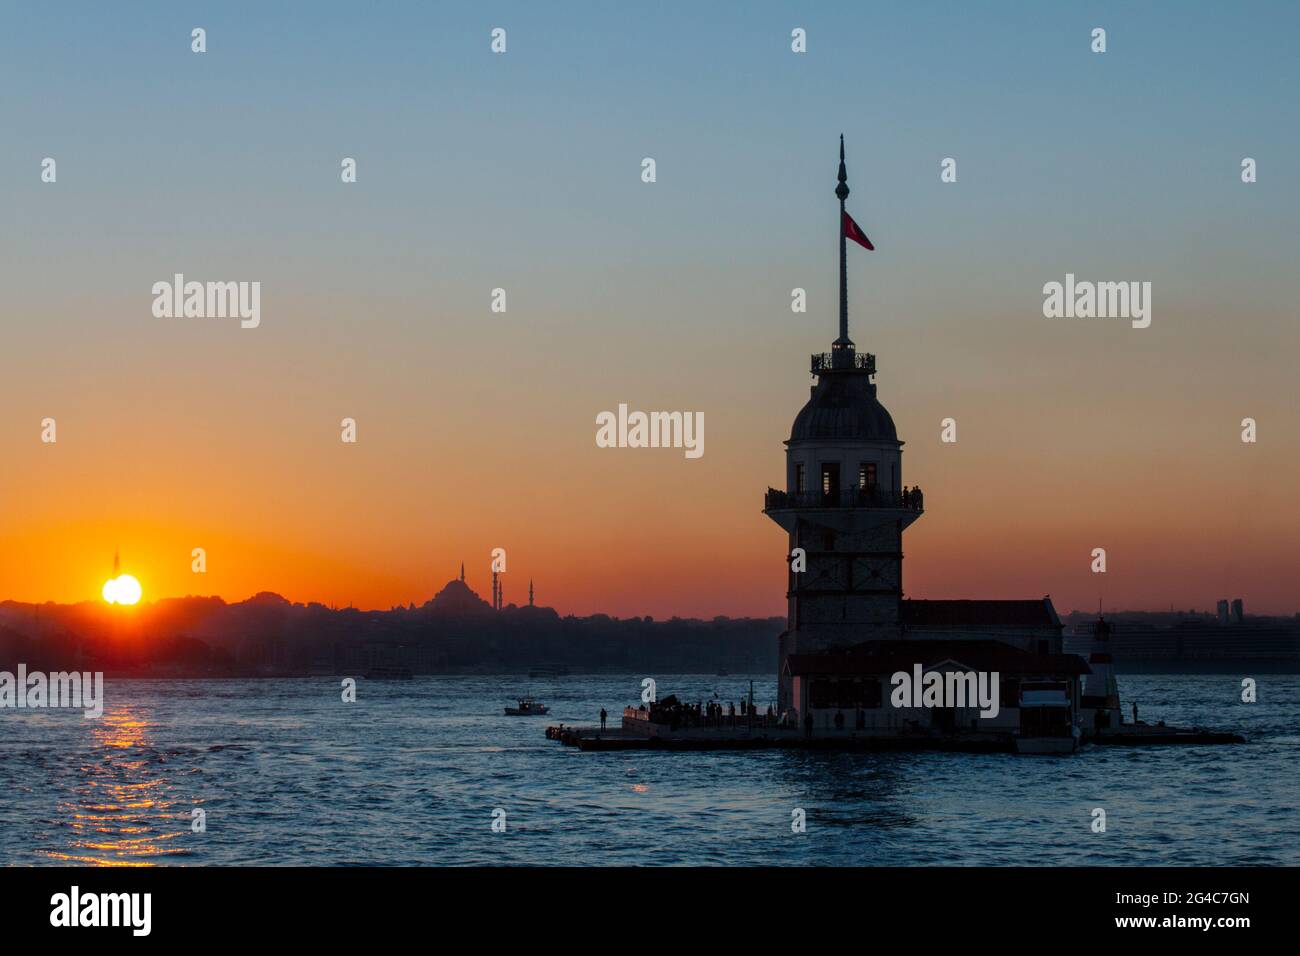 Maiden's Tower in silhouette at the sunset, which was a Byzantine lighthouse on the Bosphorus, Istanbul, Turkey Stock Photo